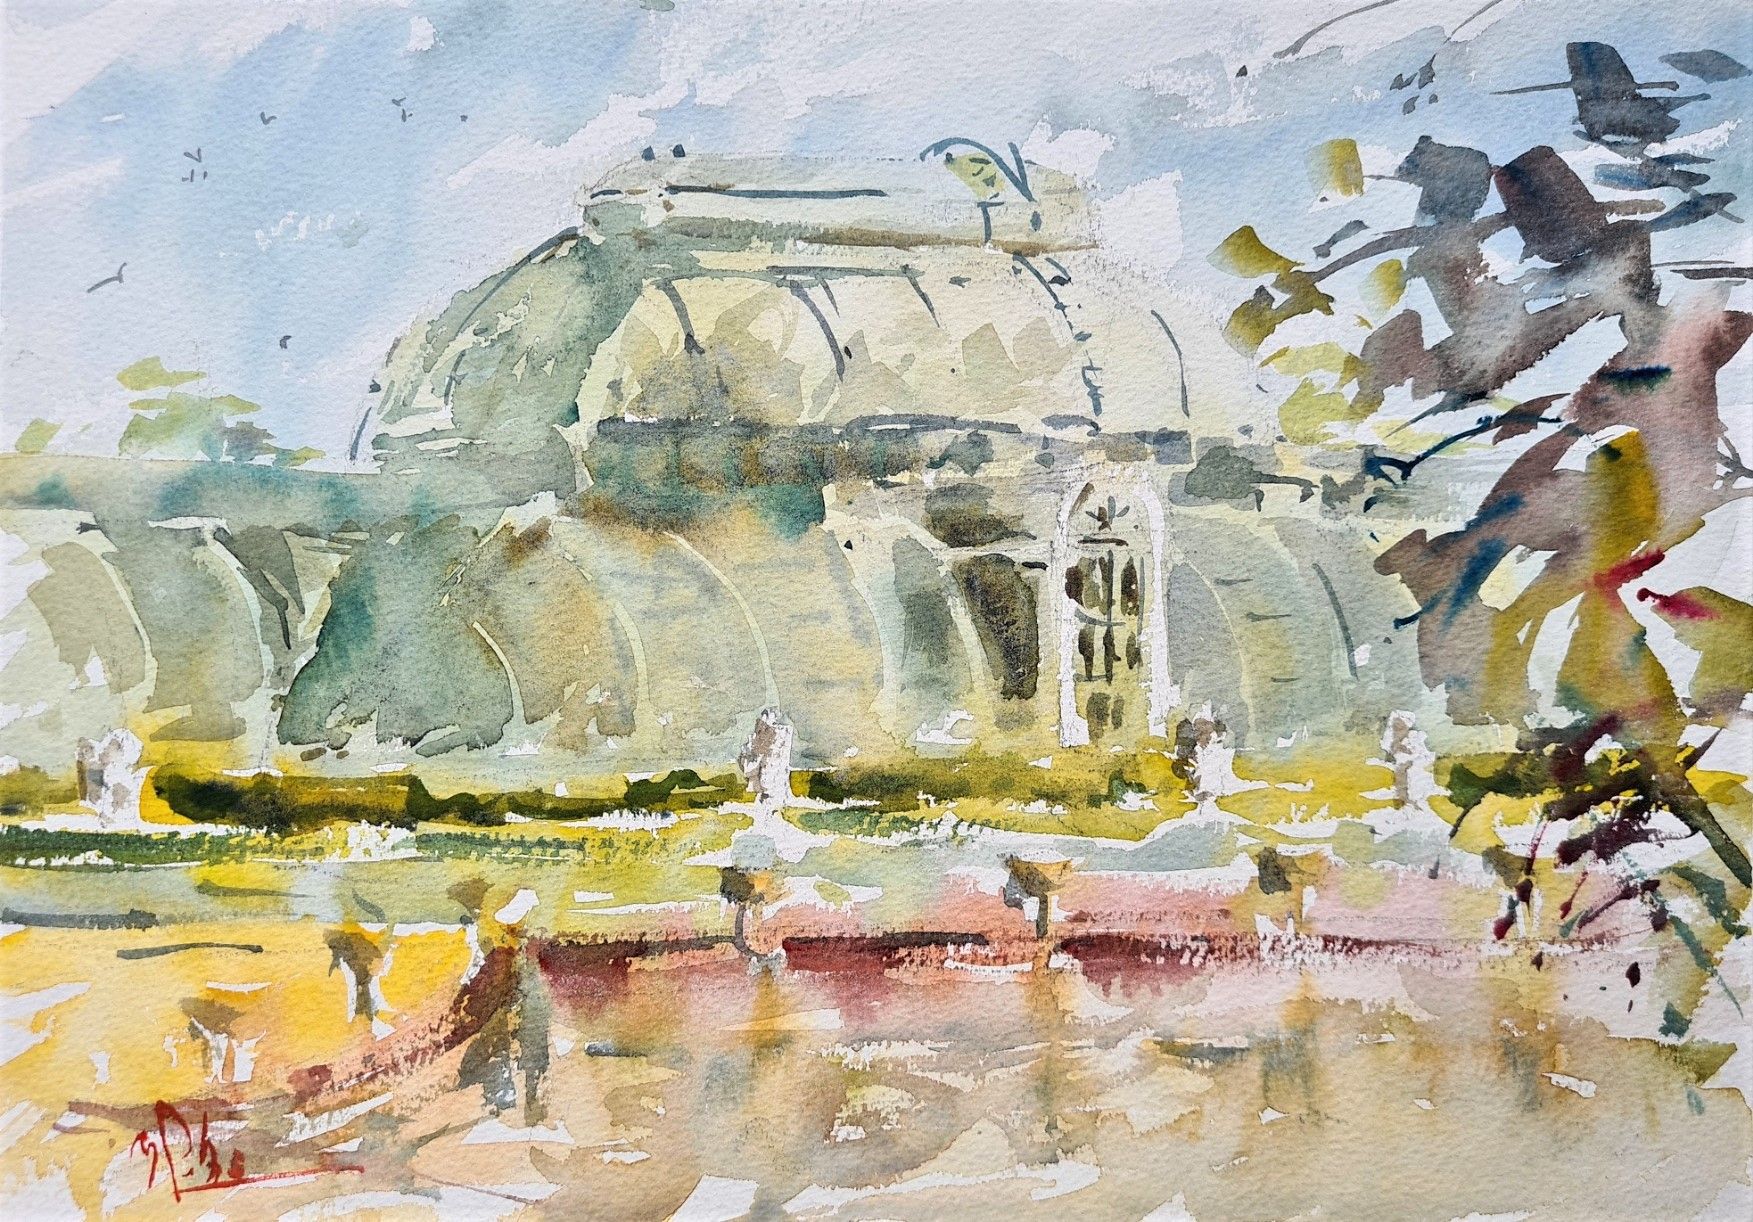 The Palmhouse of Kew Gardens by Max Panks